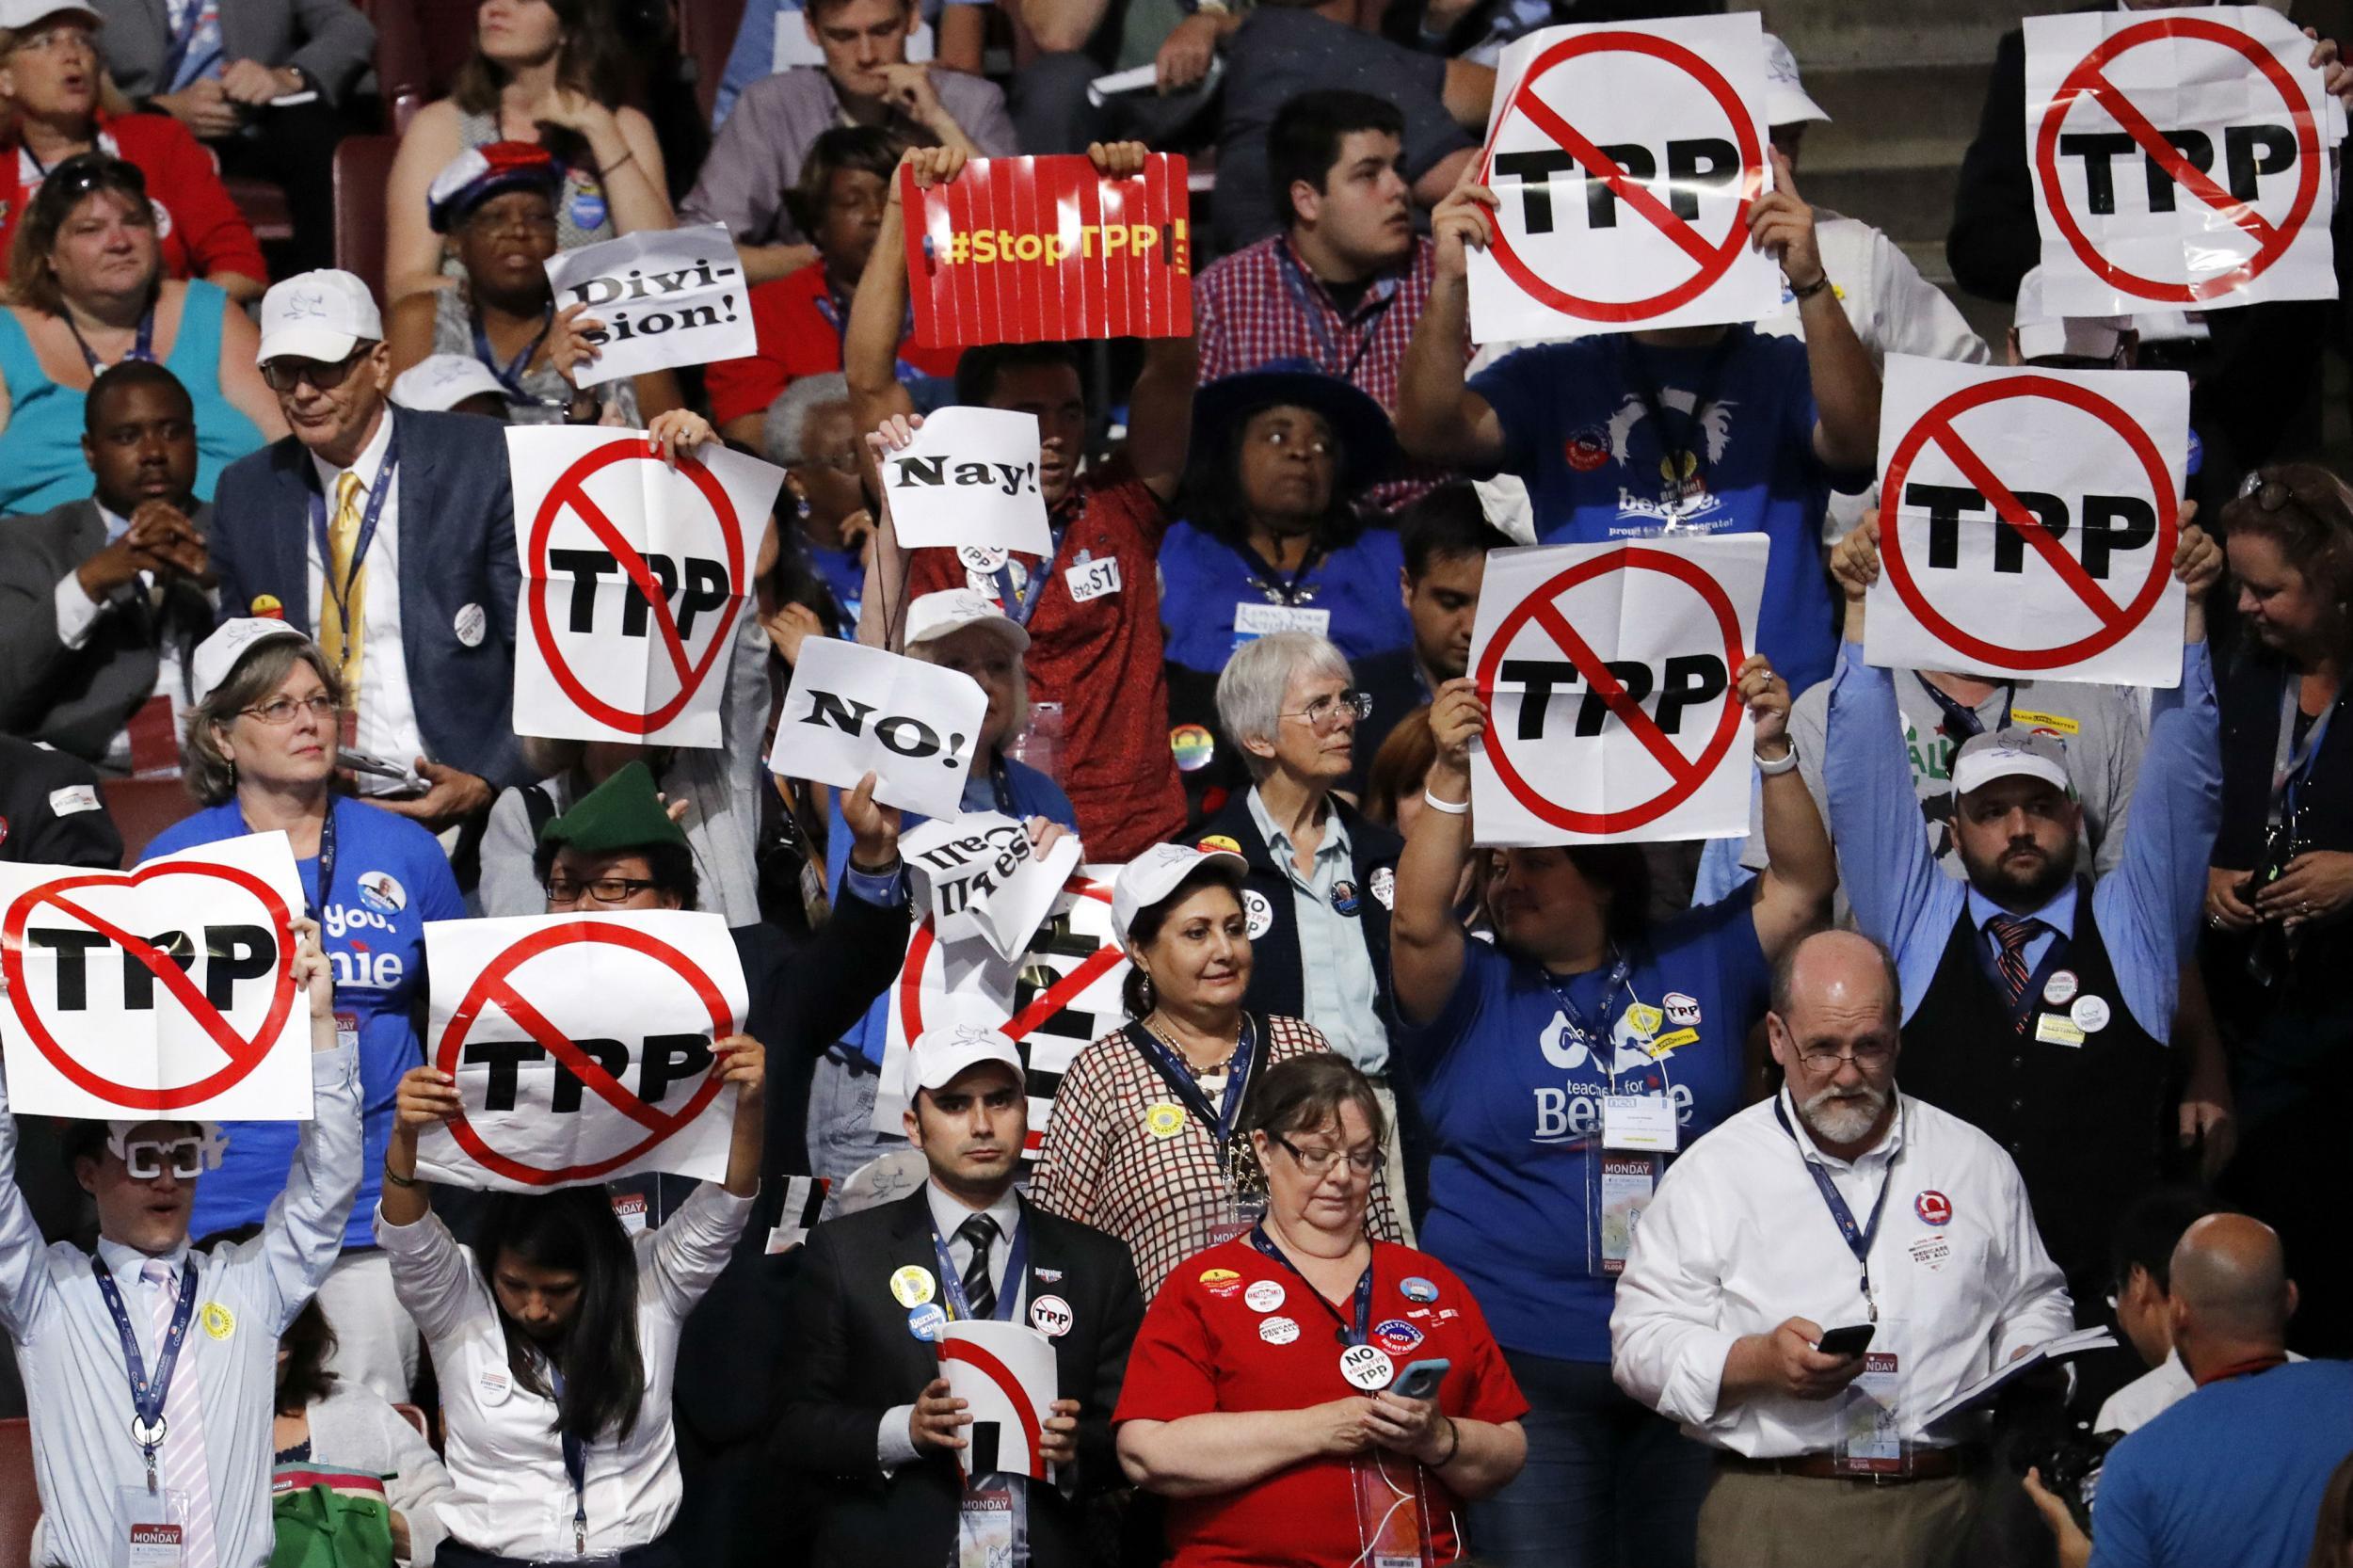 Delegates protest the Trans-Pacific Partnership on convention floor